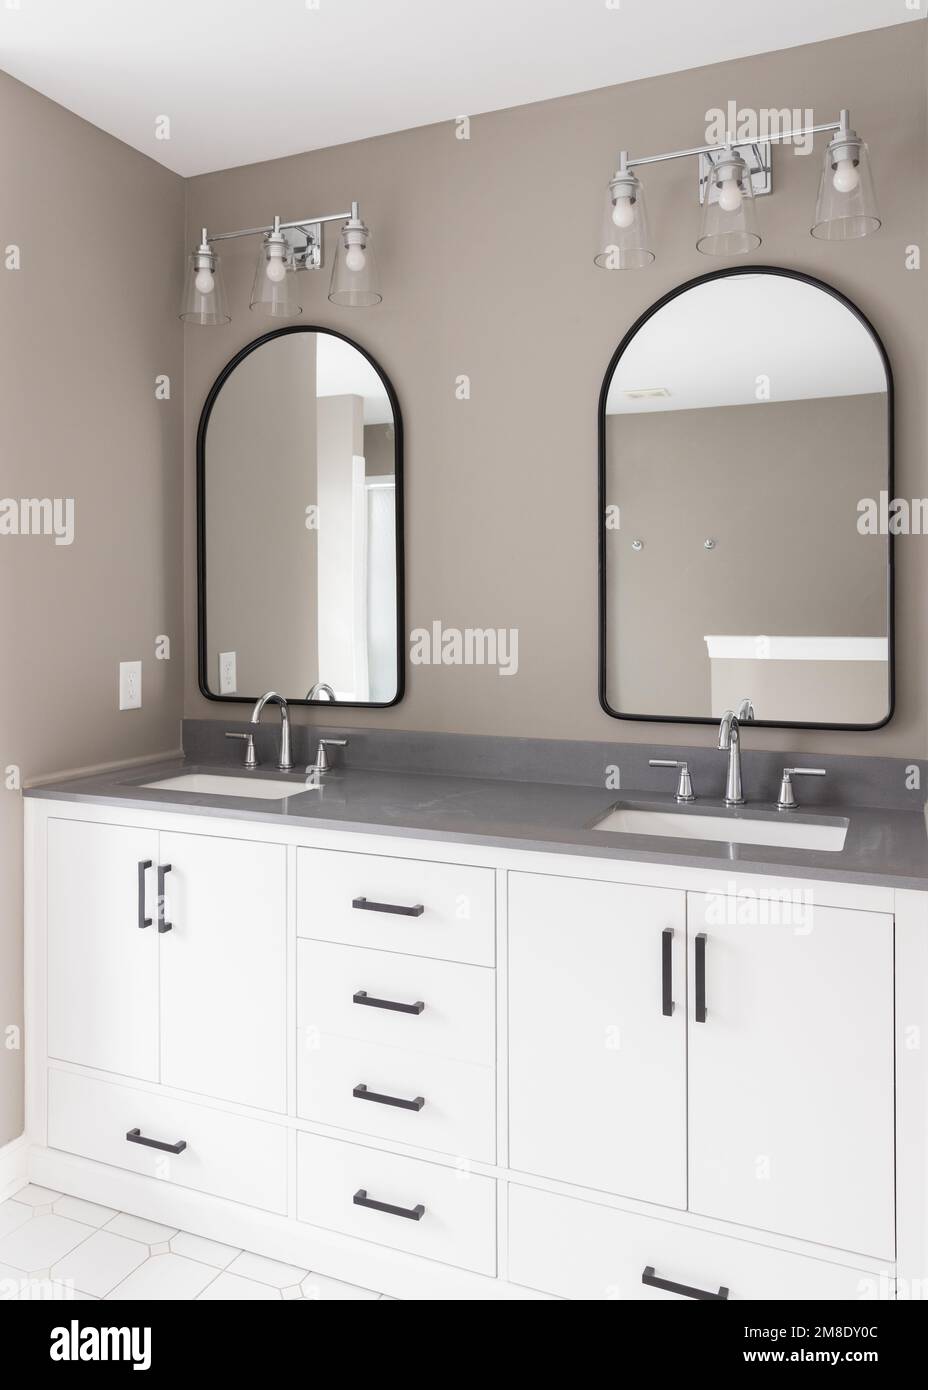 A bathroom with a white vanity and black hardware, chrome faucets on a  quartz countertop, arched mirrors, and brown walls Stock Photo - Alamy